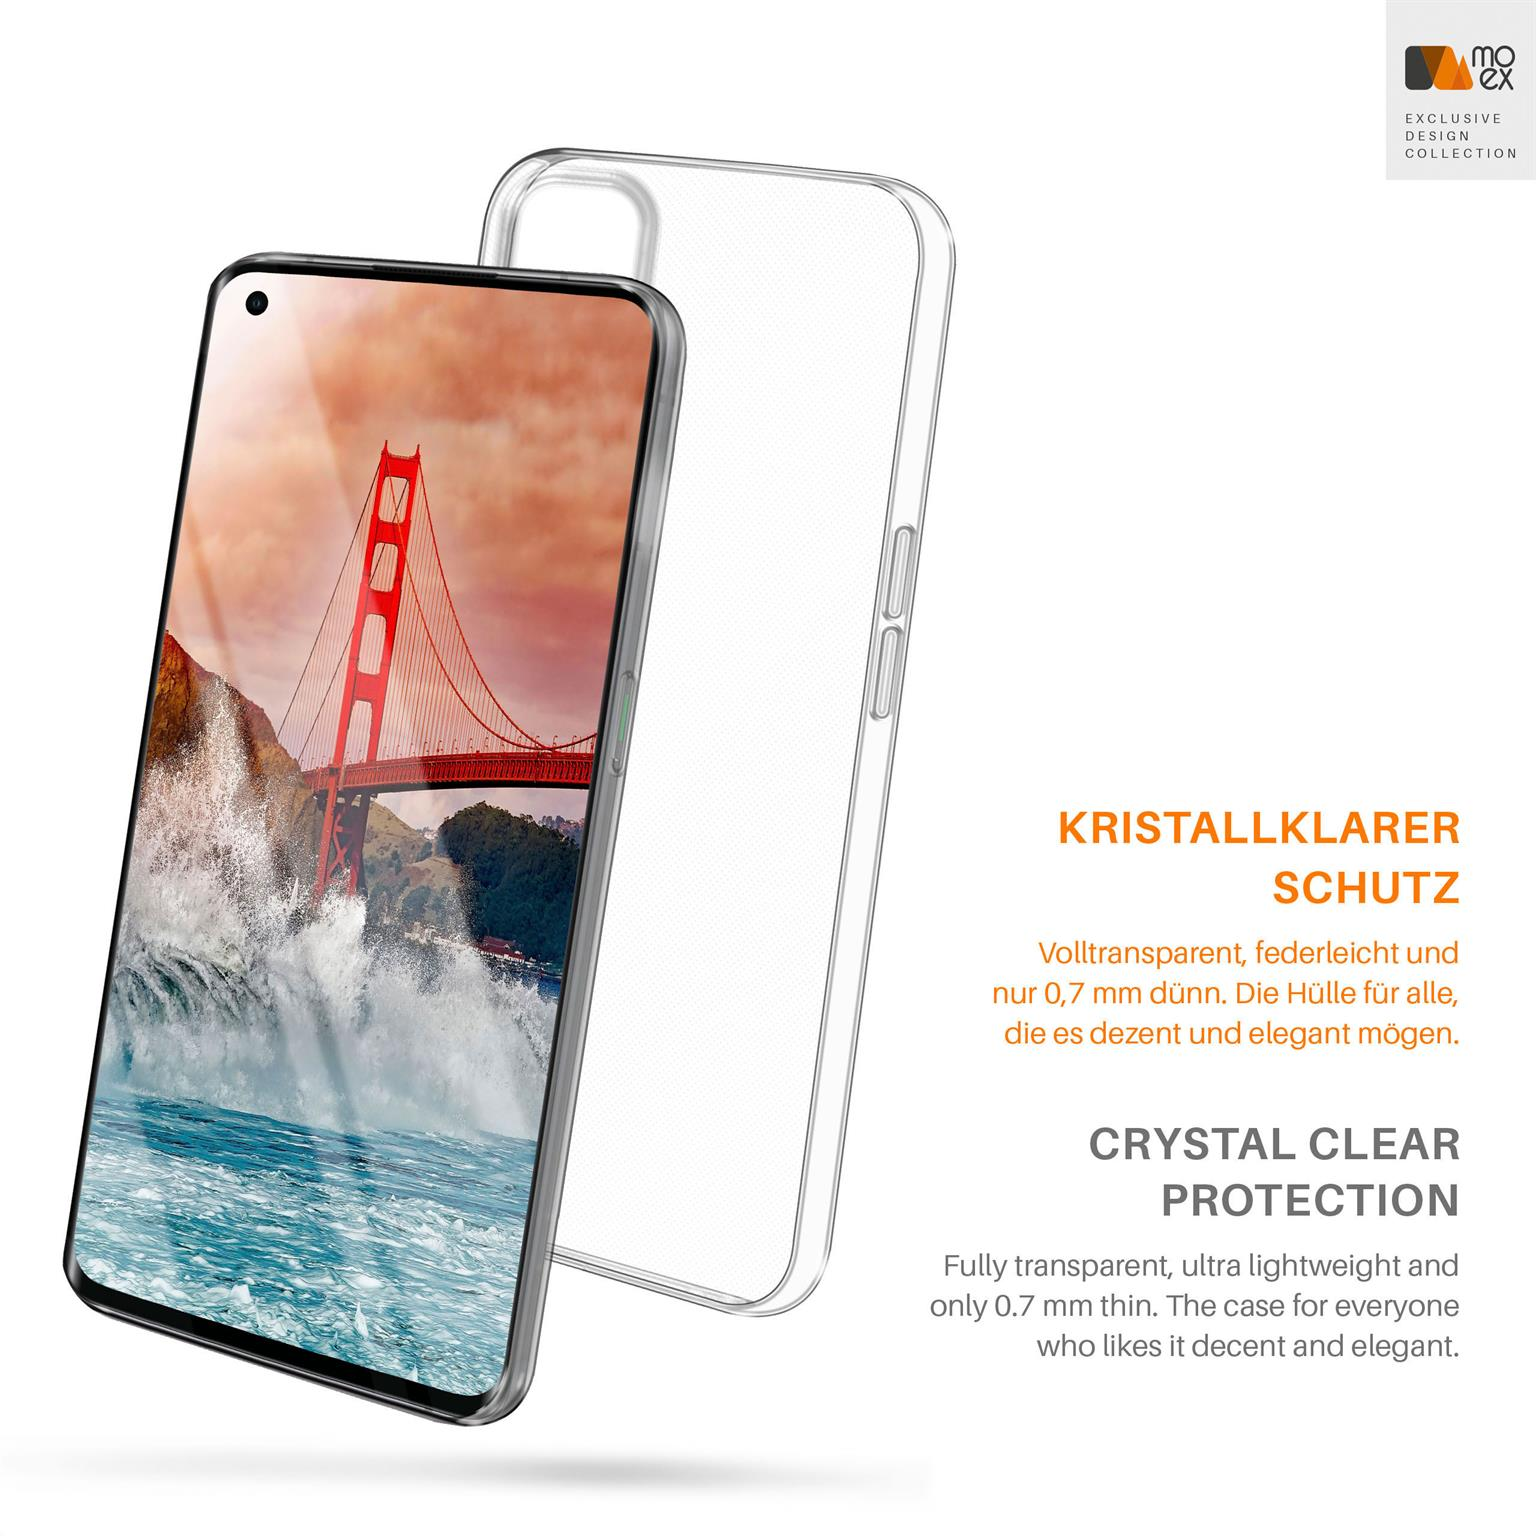 MOEX Aero Case, Backcover, Oppo, Reno4 Pro Crystal-Clear 5G